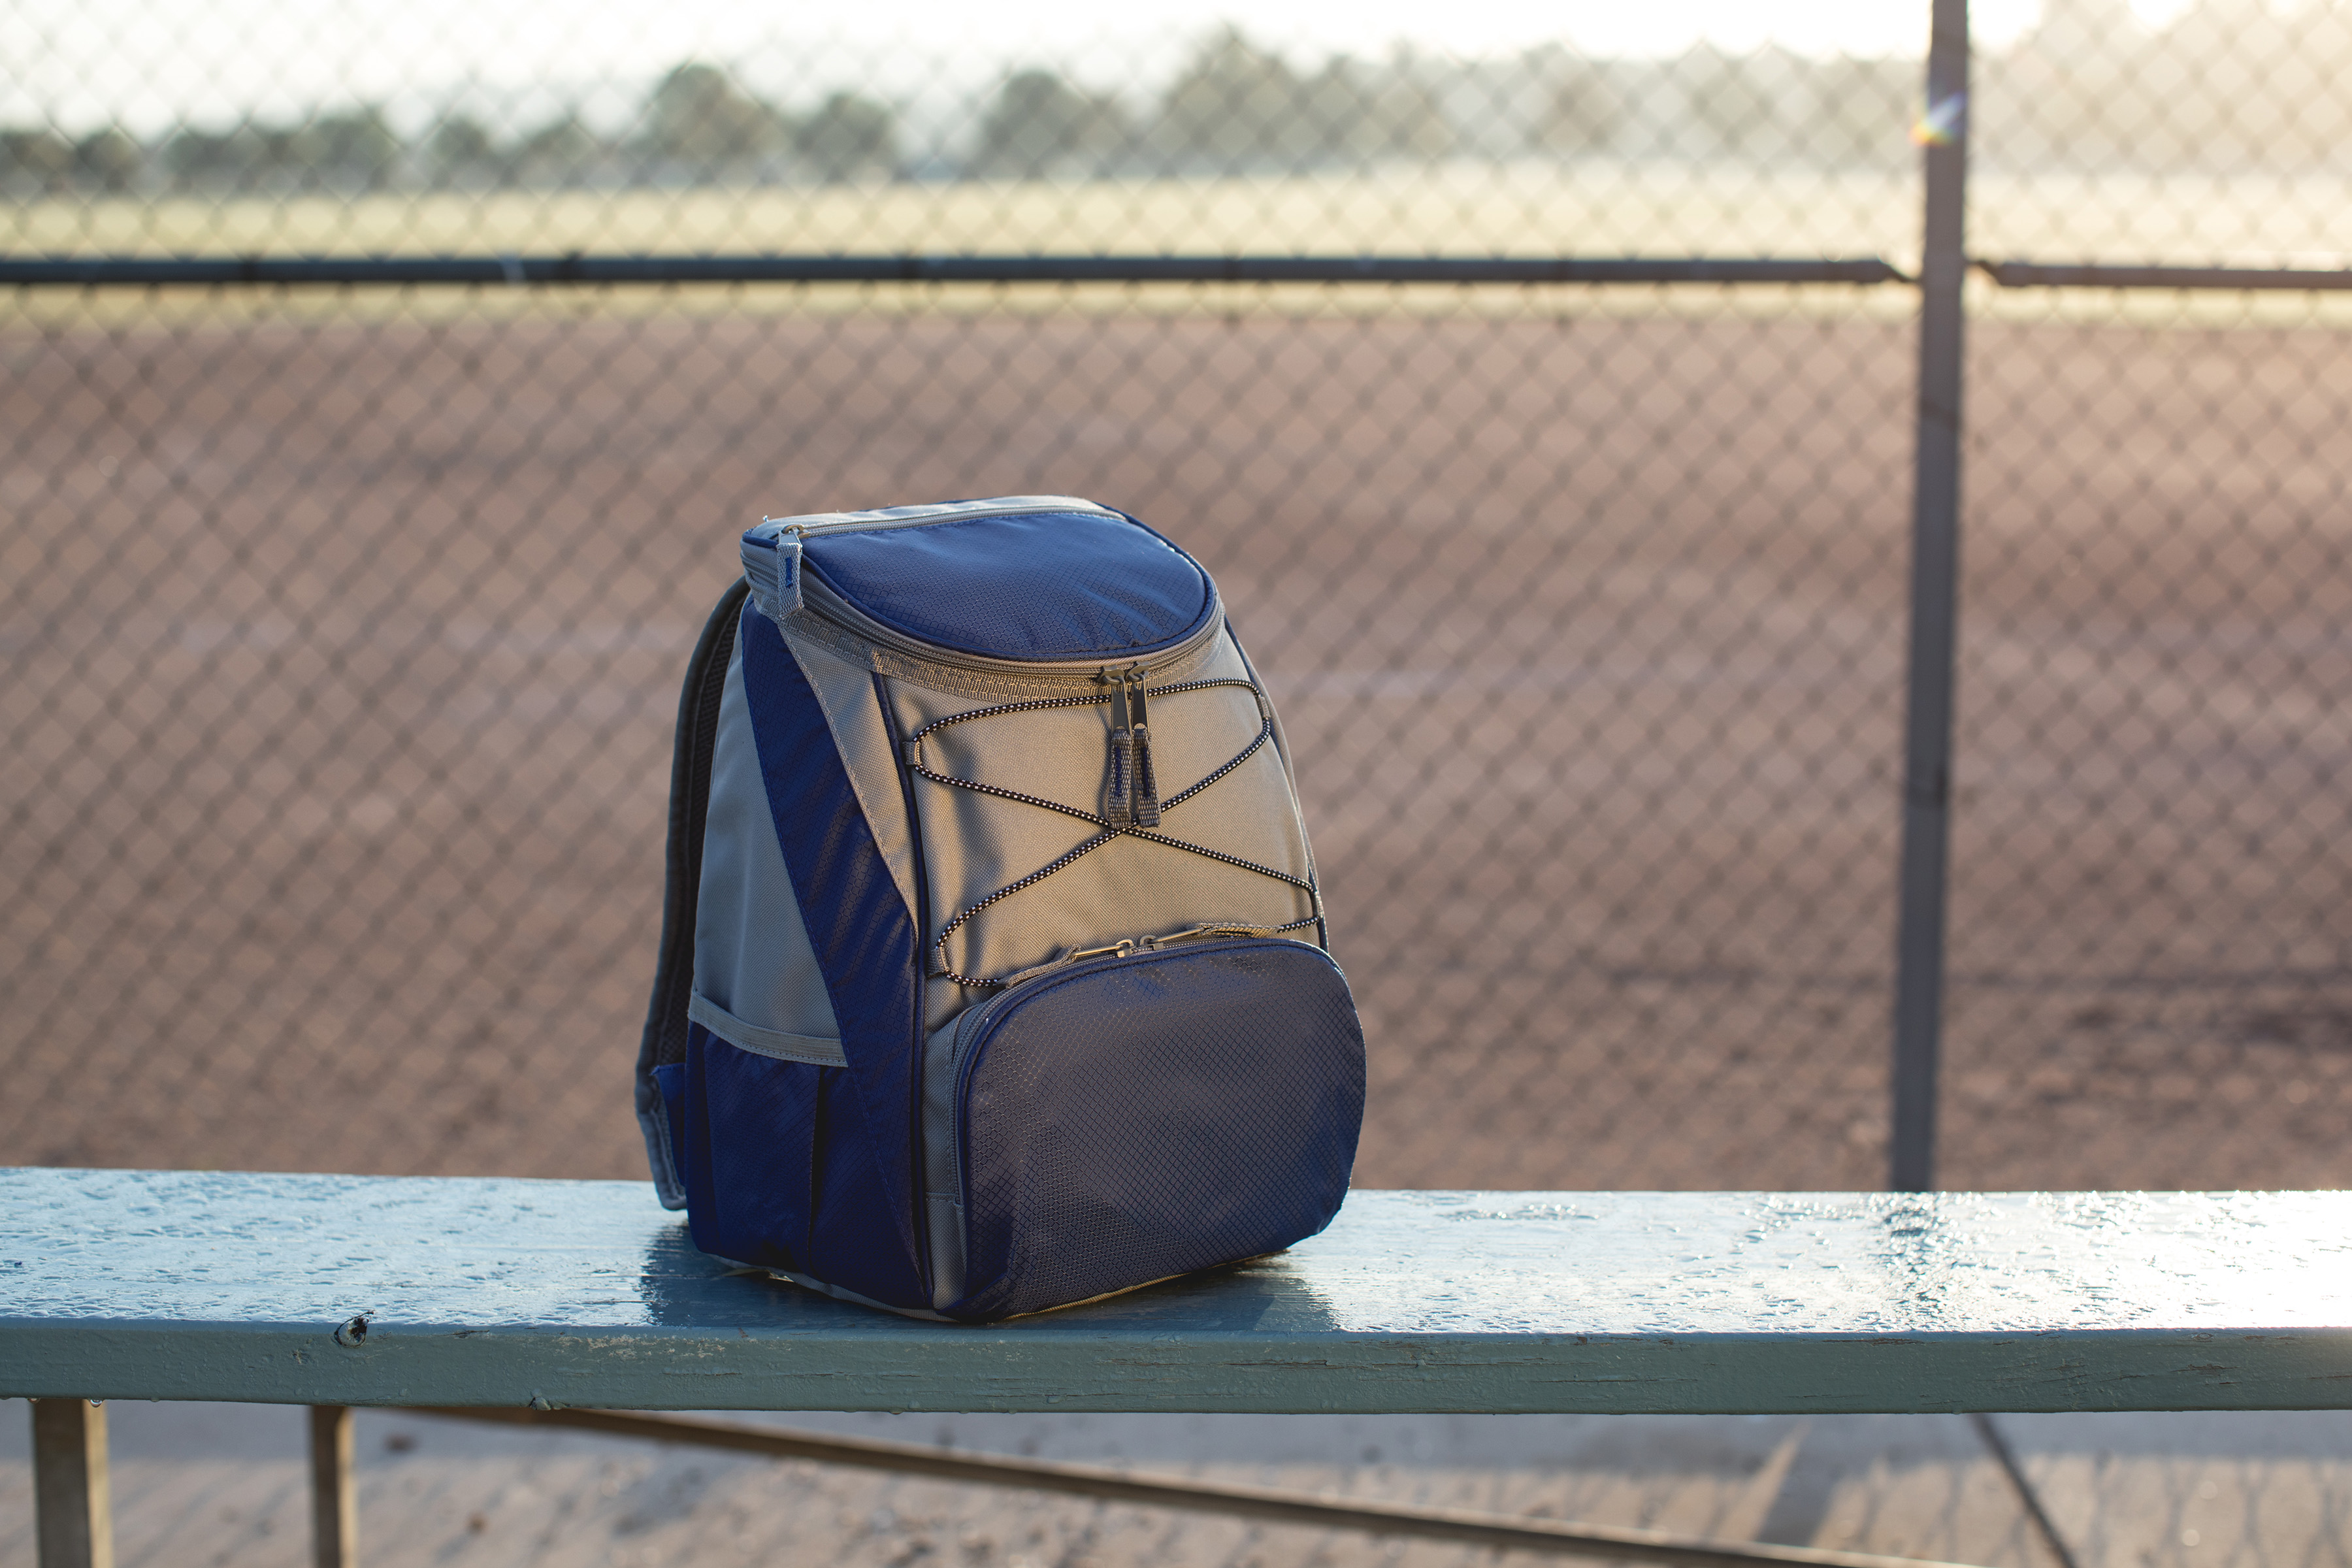 Seattle Mariners - PTX Backpack Cooler